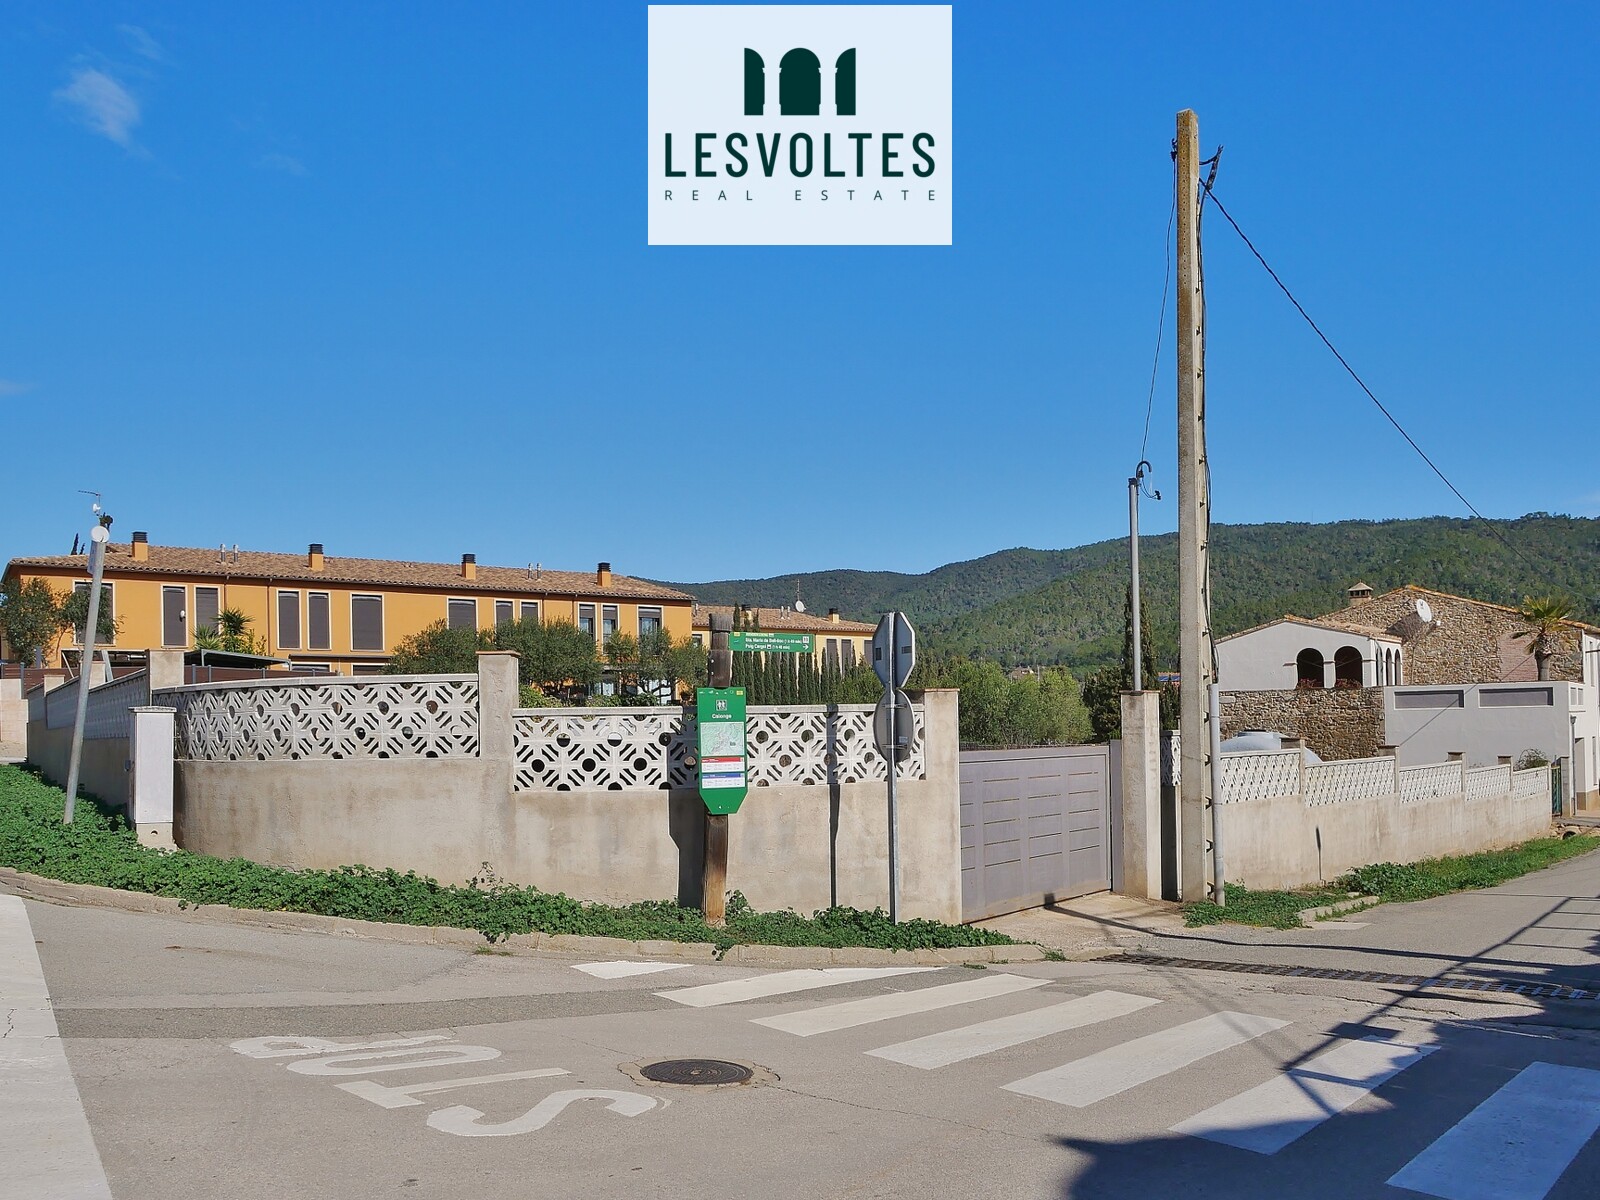 PLOT OF 1096 M² FOR SALE IN CALONGE, RESIDENTIAL AREA.